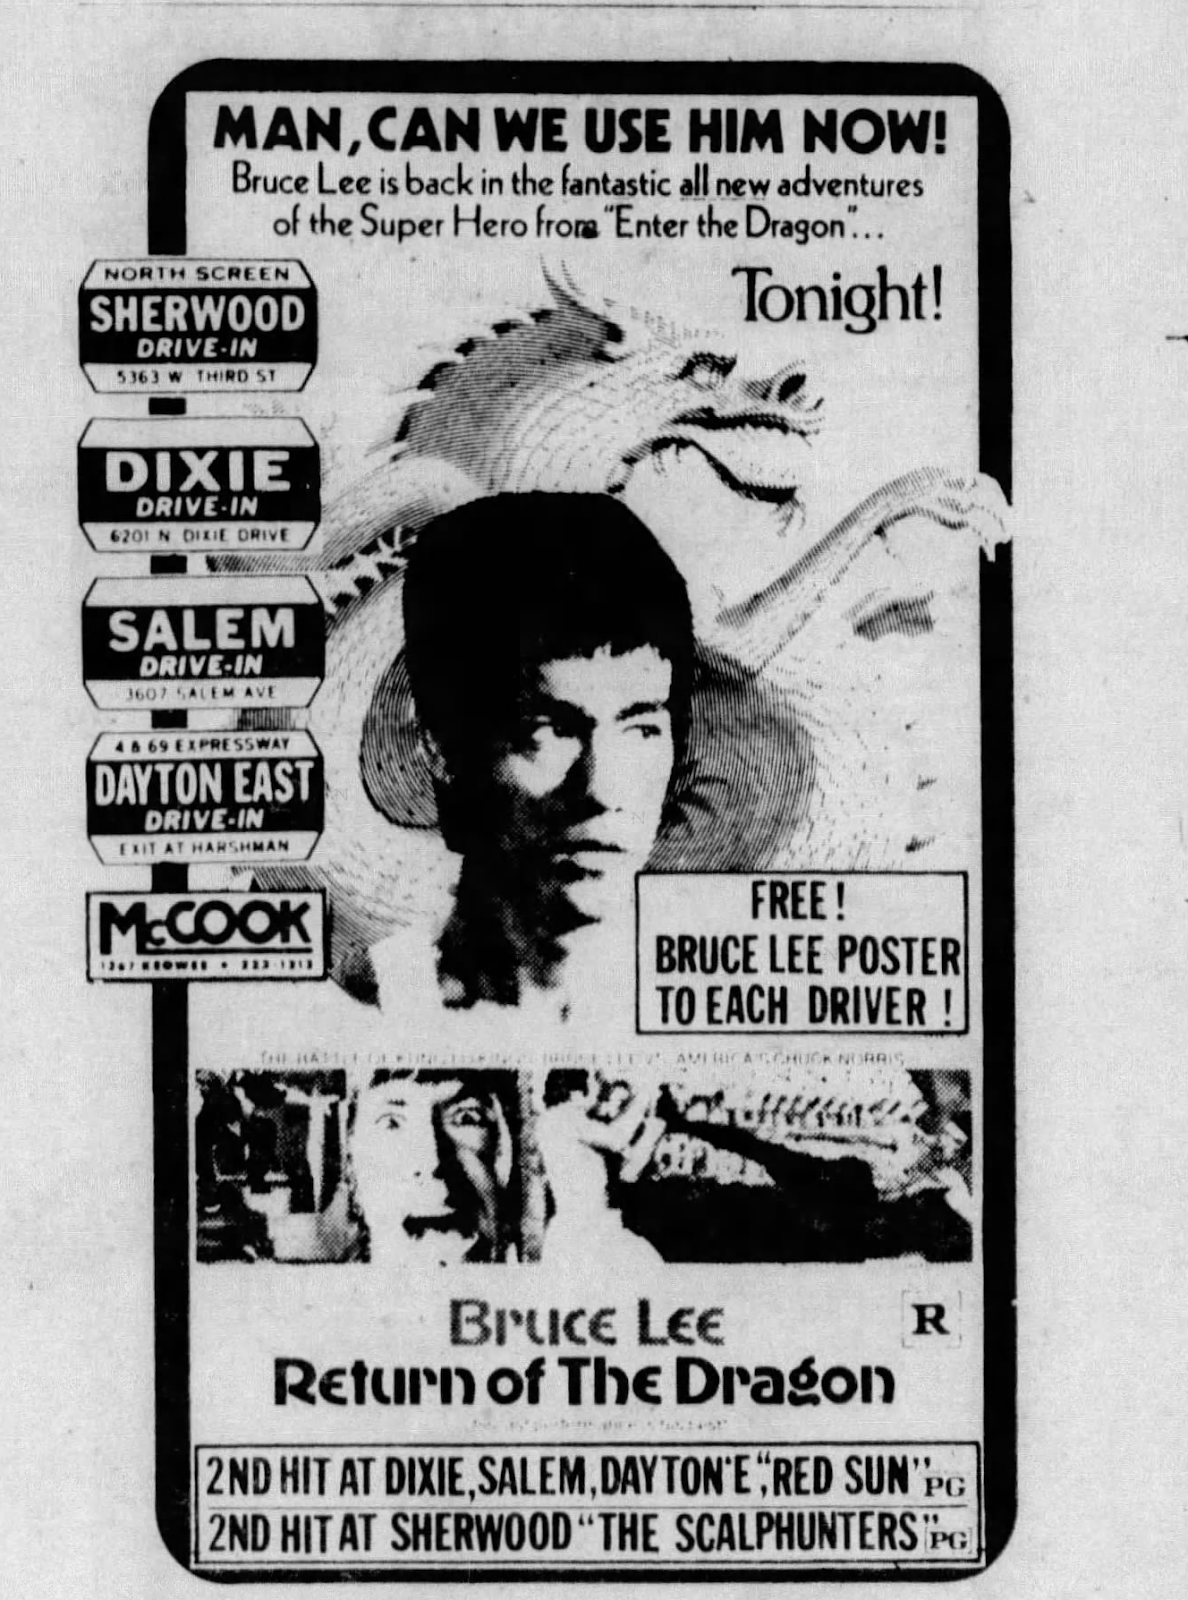 1974 Bruce Lee Return of The Dragon Promo Poster from Dayton, Ohio 